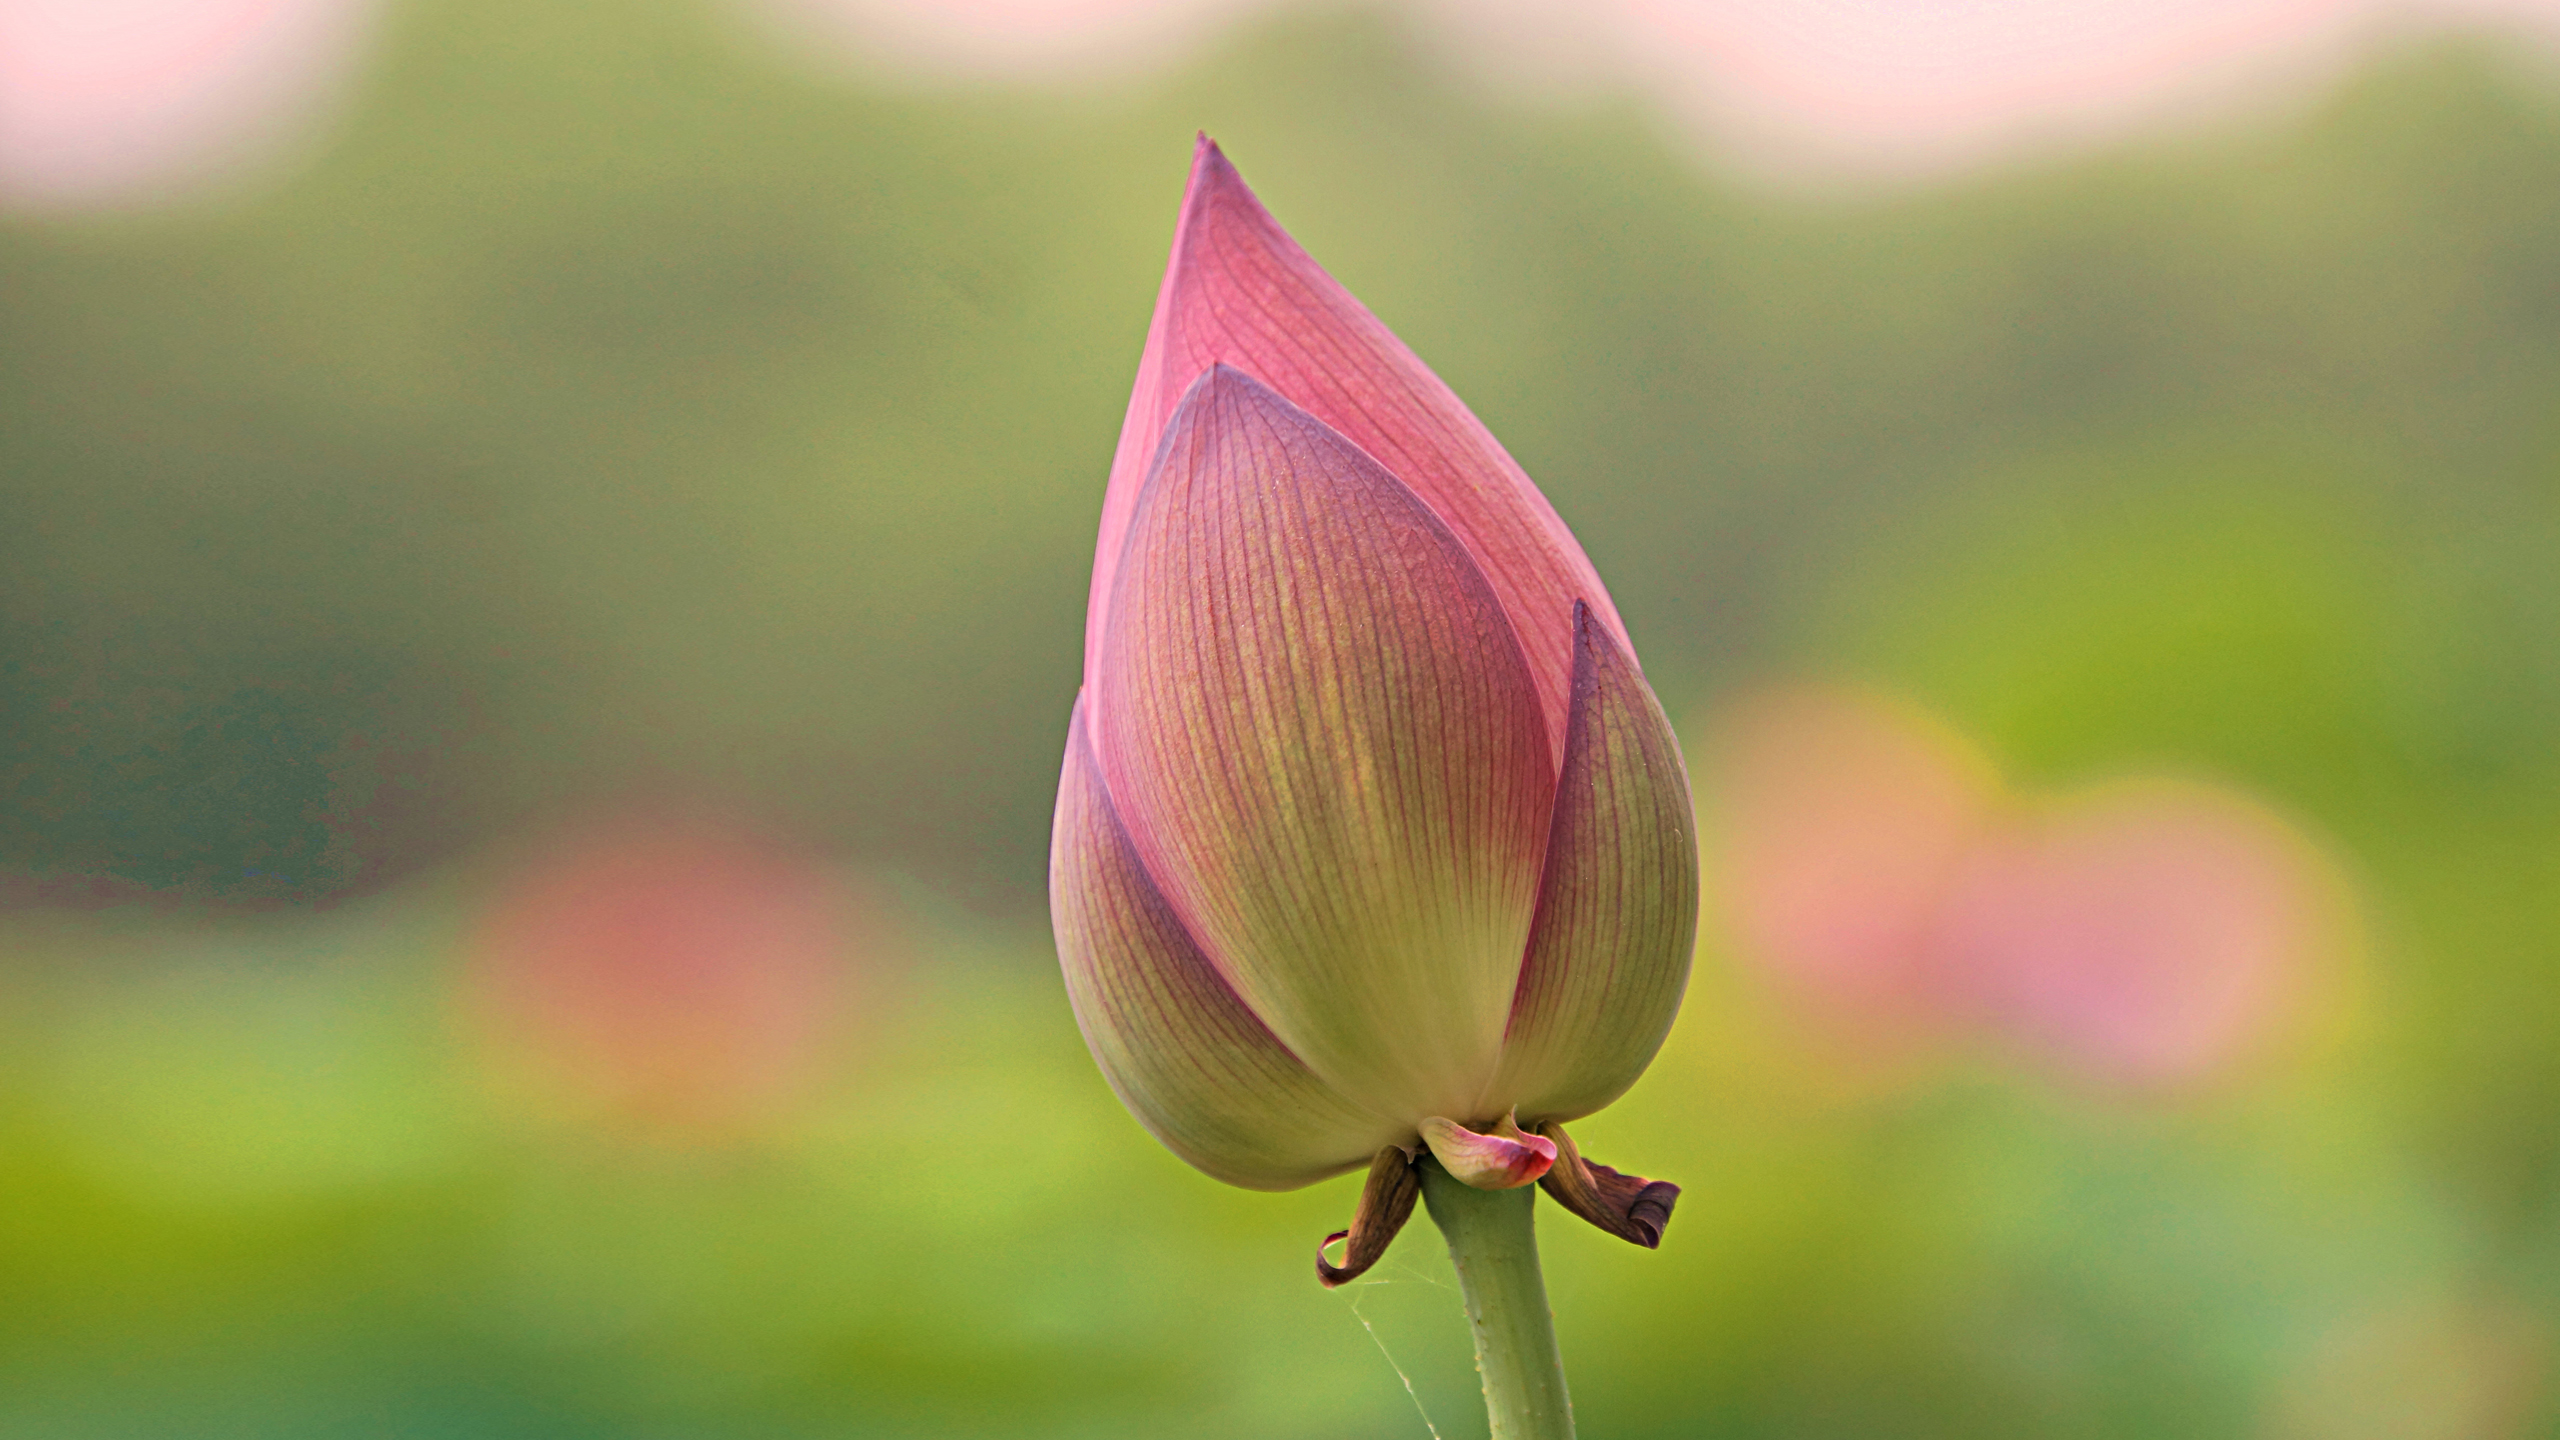 High Resolution Picture Of Lotus Flower Bud in Close Up | HD ...